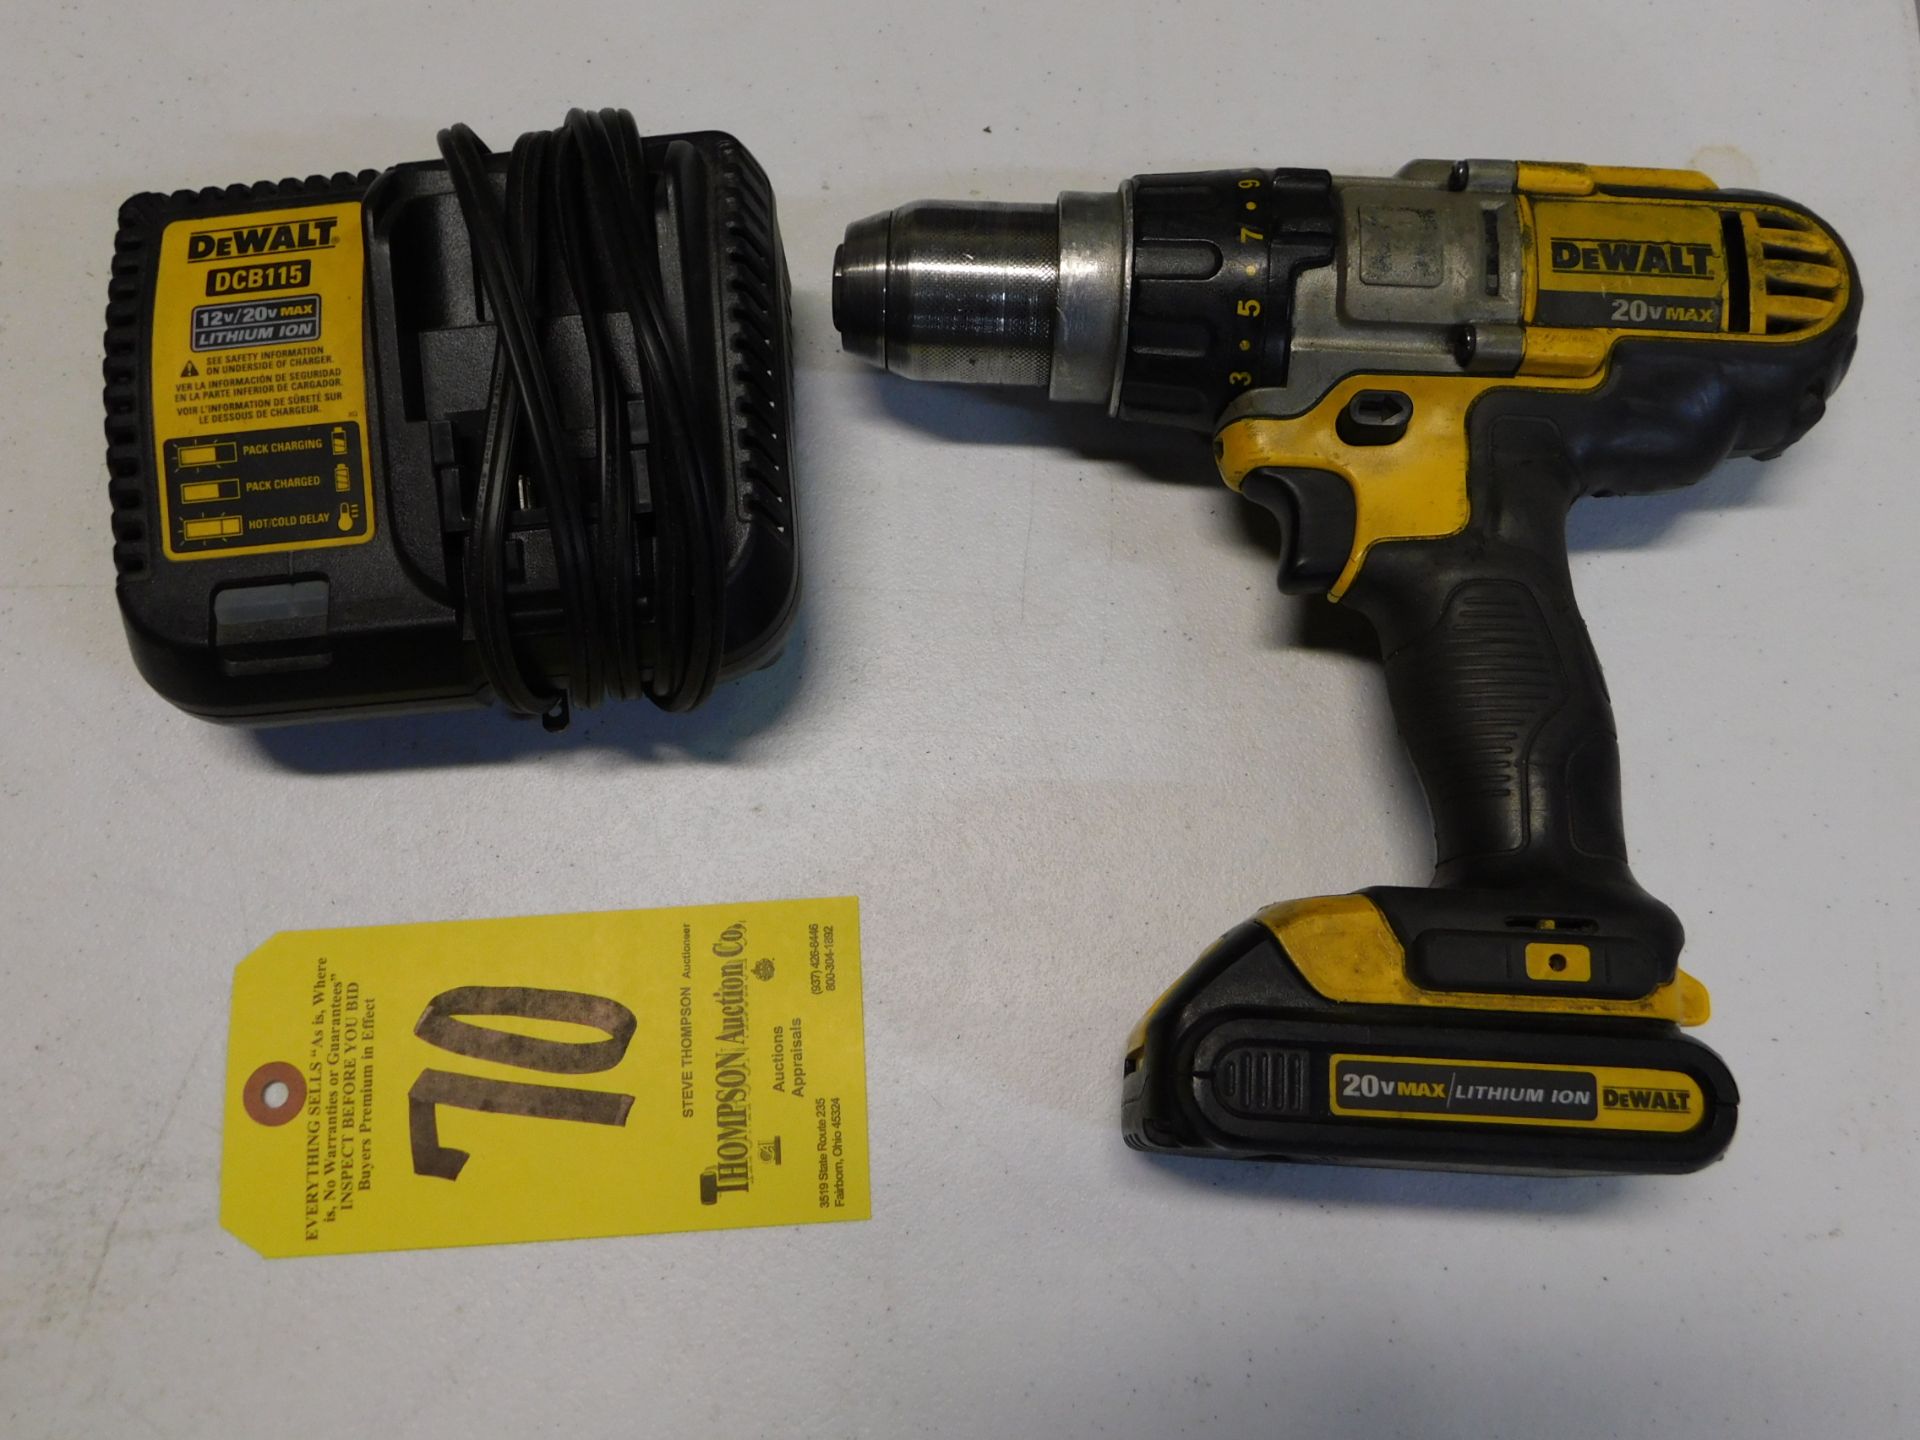 Dewalt DCD985 1/2" Cordless 20V Drill with Battery and Charger, Lot Location 3204 Olympia Dr. A,